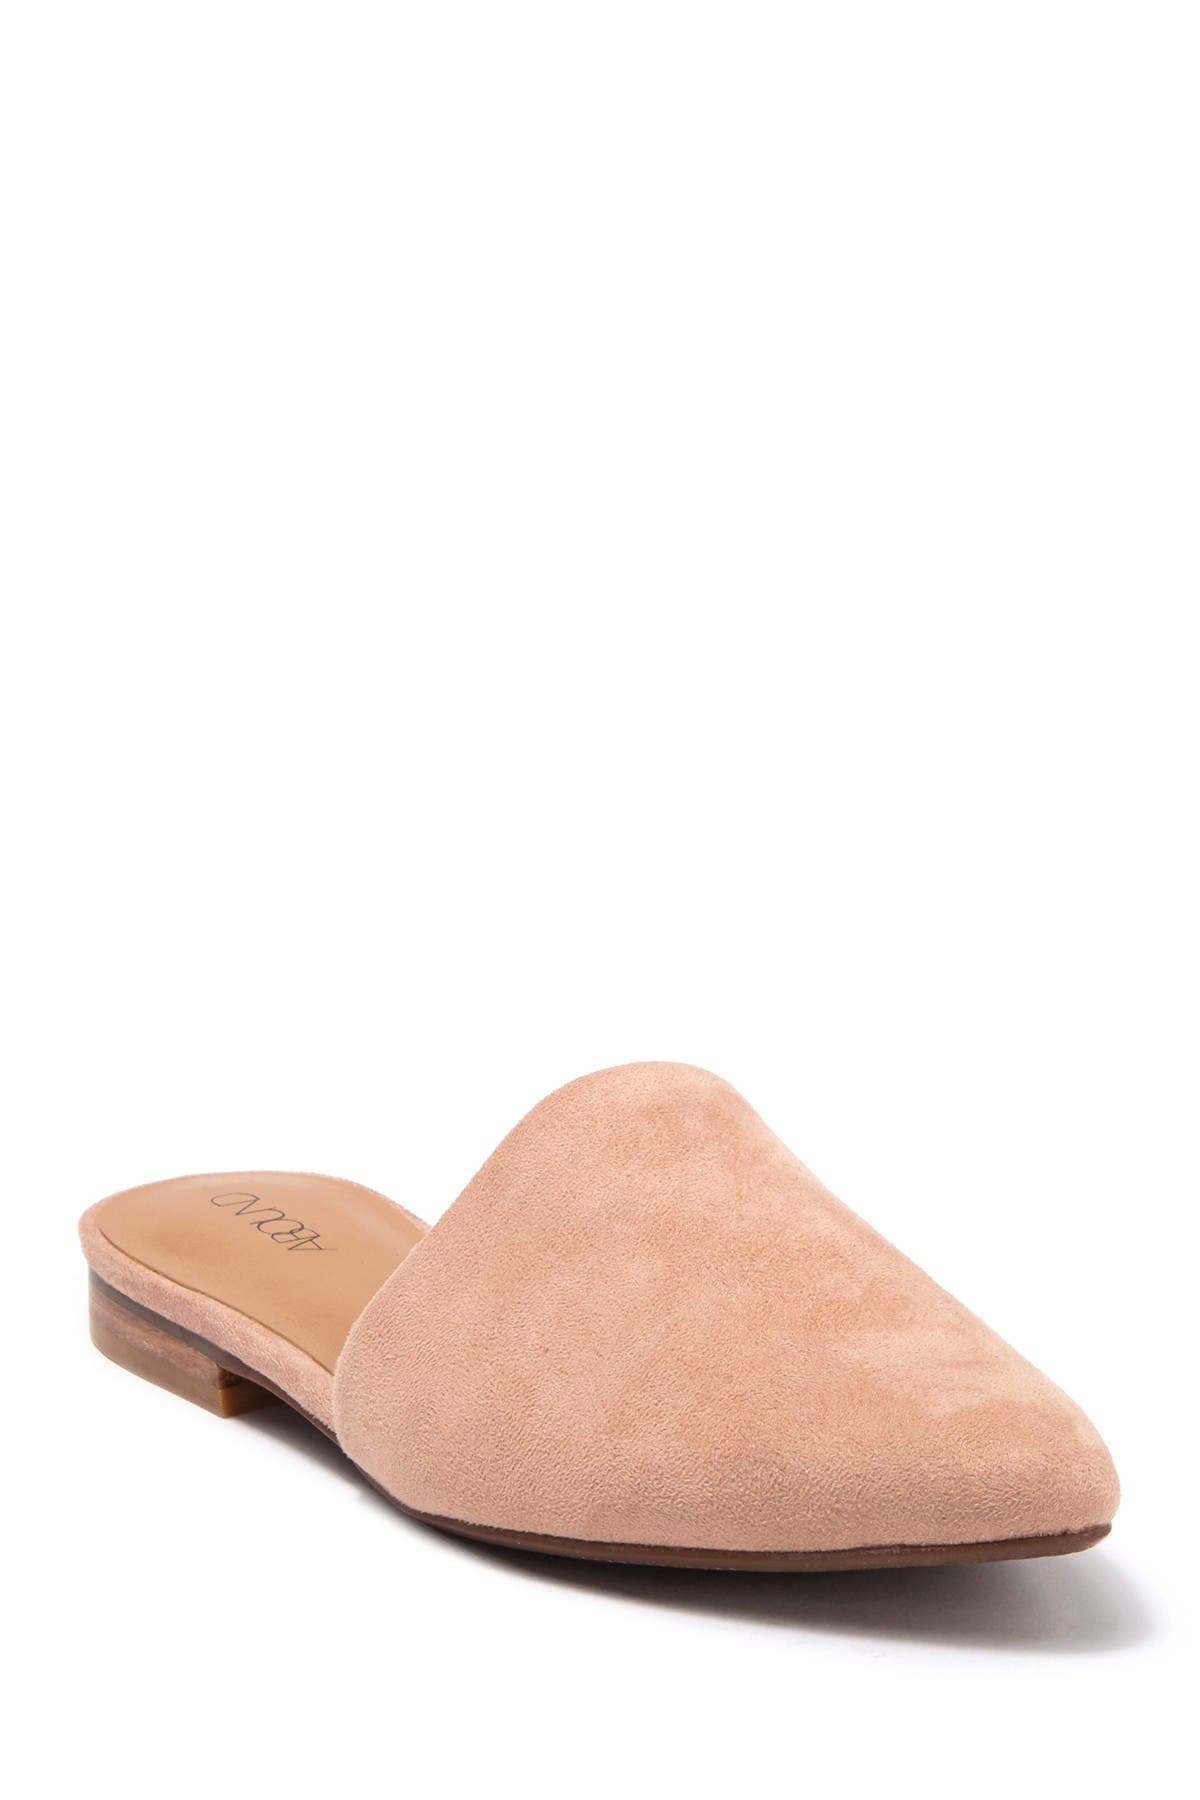 Abound Amelya Pointed Toe Mule In Light/pastel Pink5